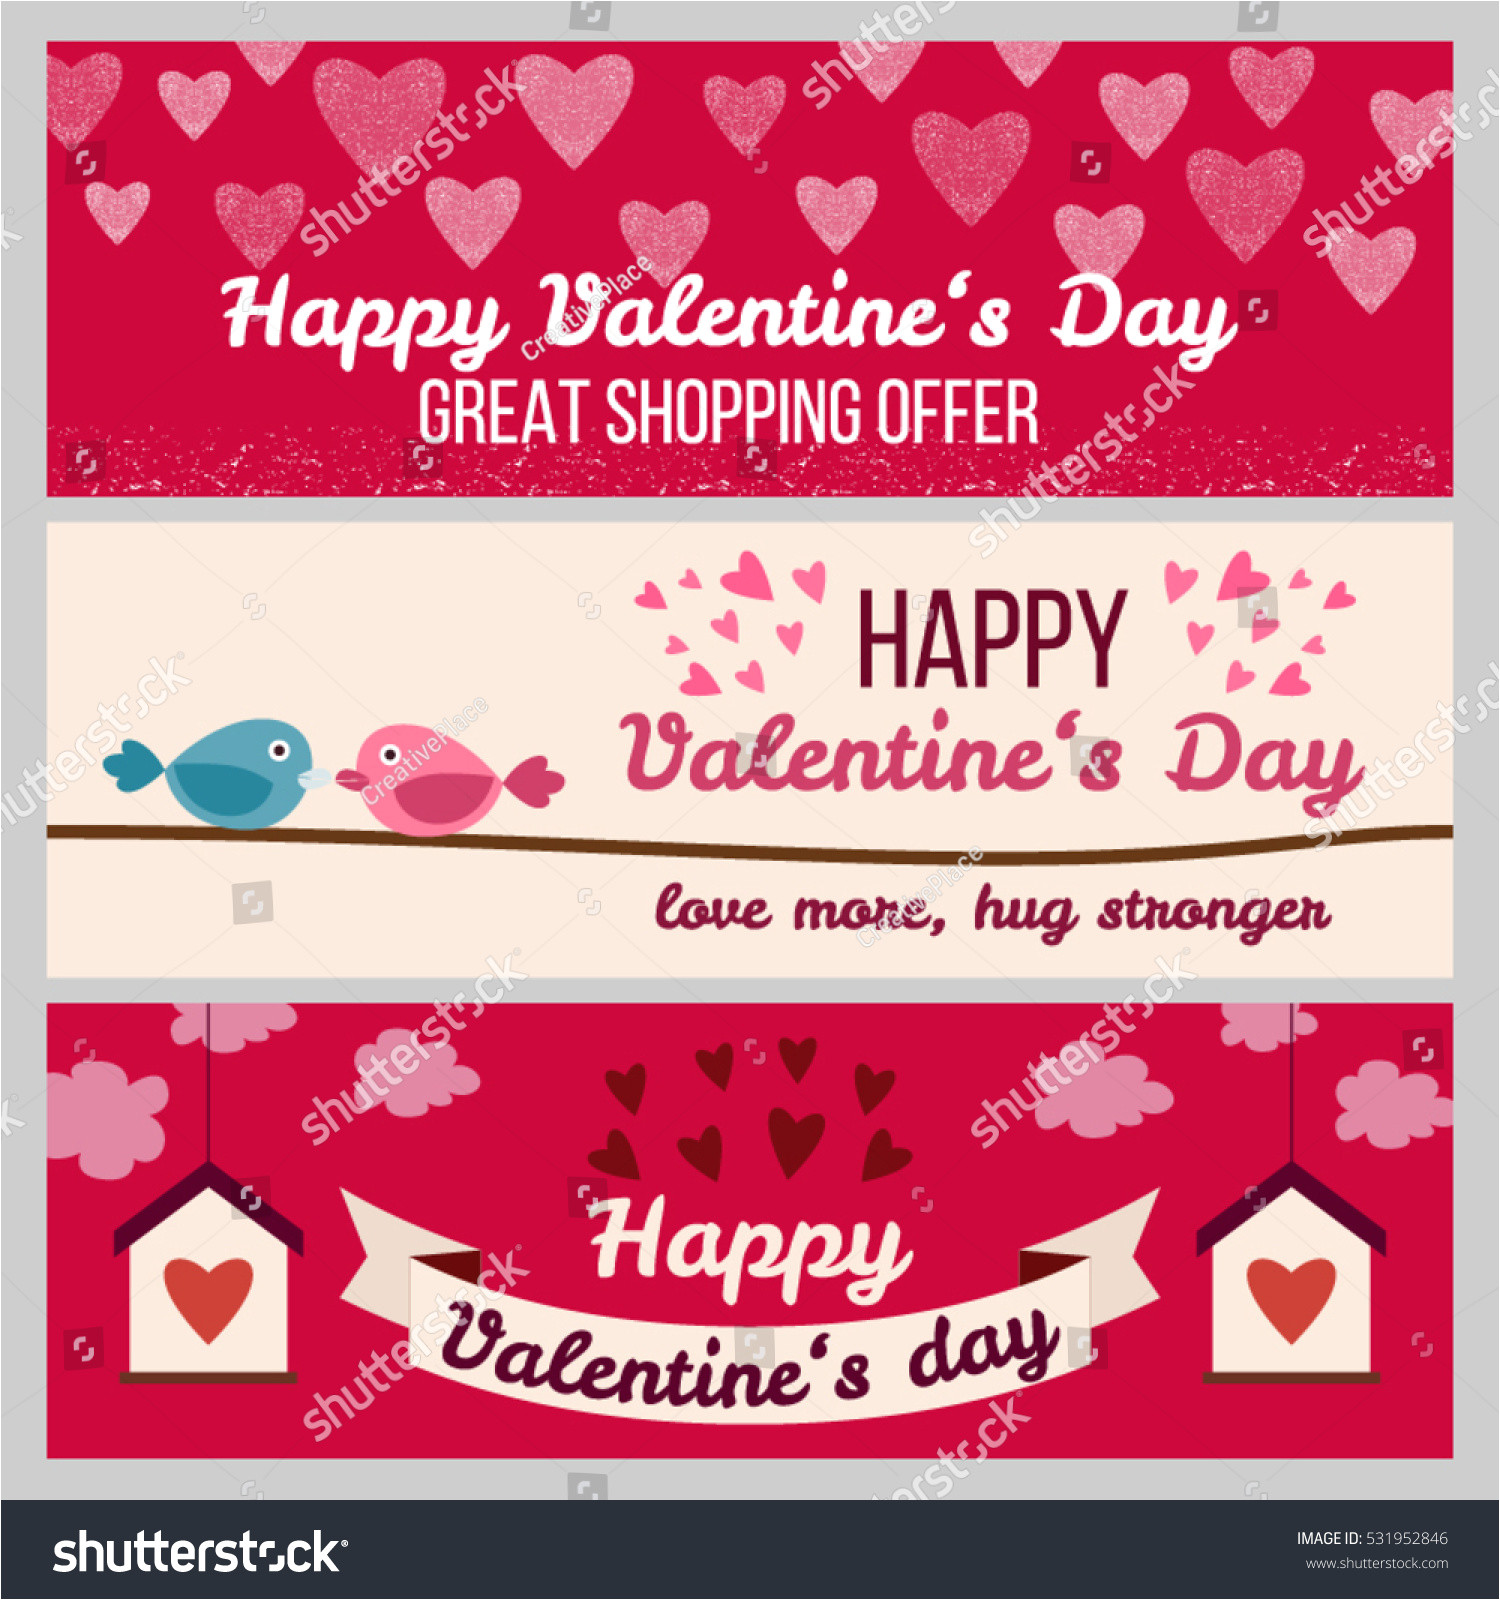 stock vector set od modern flat valentine s day greetings cards banners vouchers and sale promotion flyers cards 531952846 jpg